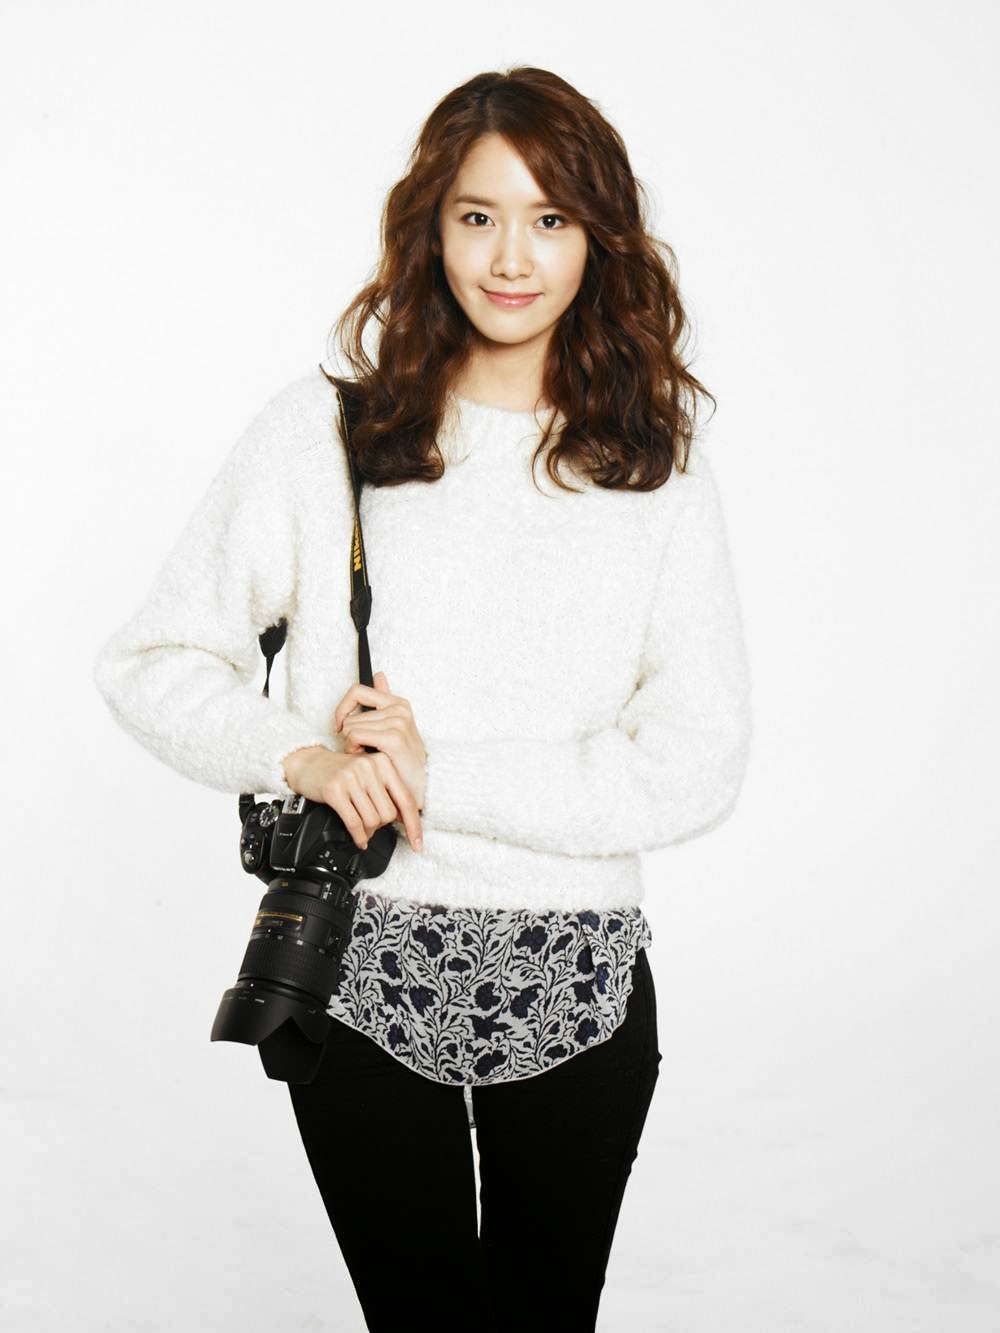 131121-snsd-yoona-prime-minister-and-i2.